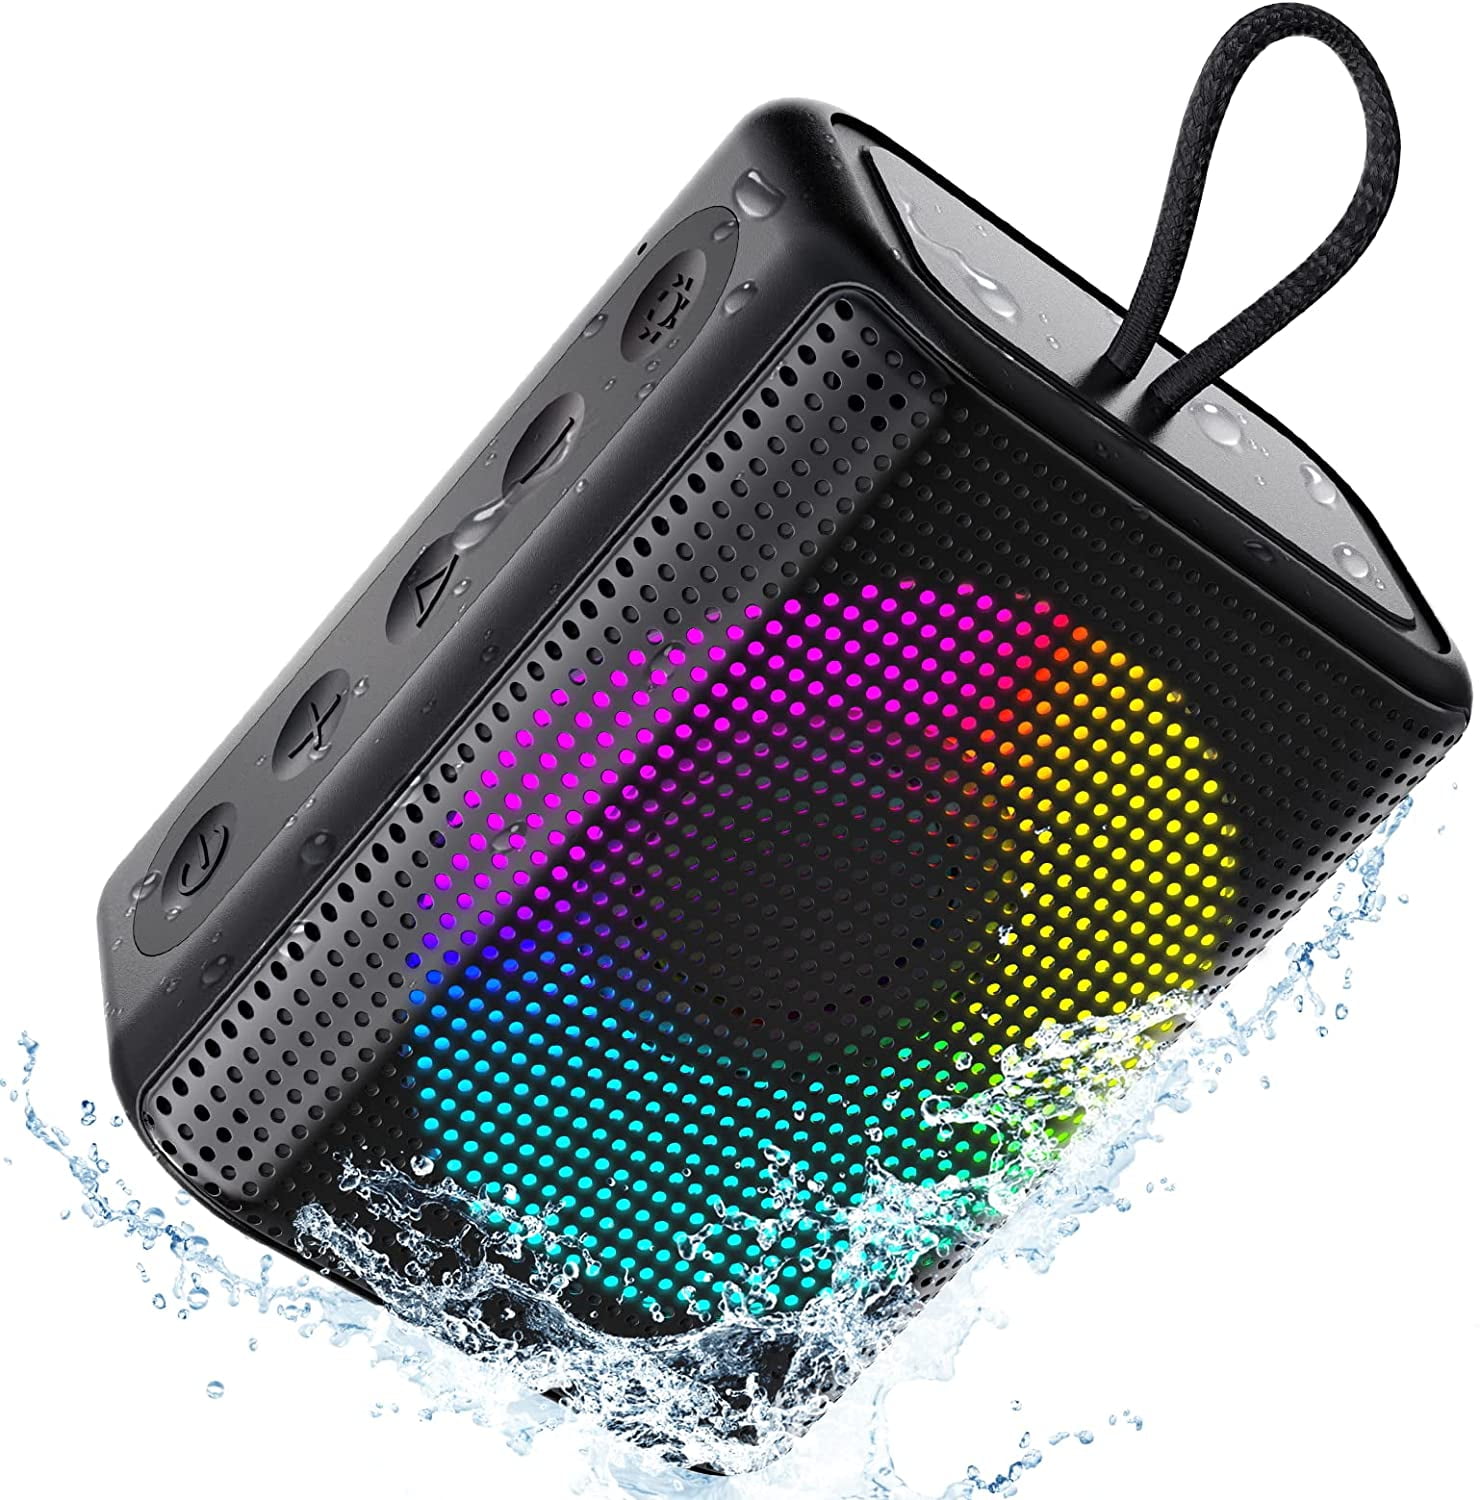 Pool Floating LED Light Speakers Indoor and Outdoor Portable Sports Speakers Desktop and Laptop Computer Speakers,8 Hours Play Time for Swimming Camping Kids Toys Waterproof Wireless Bluetooth 